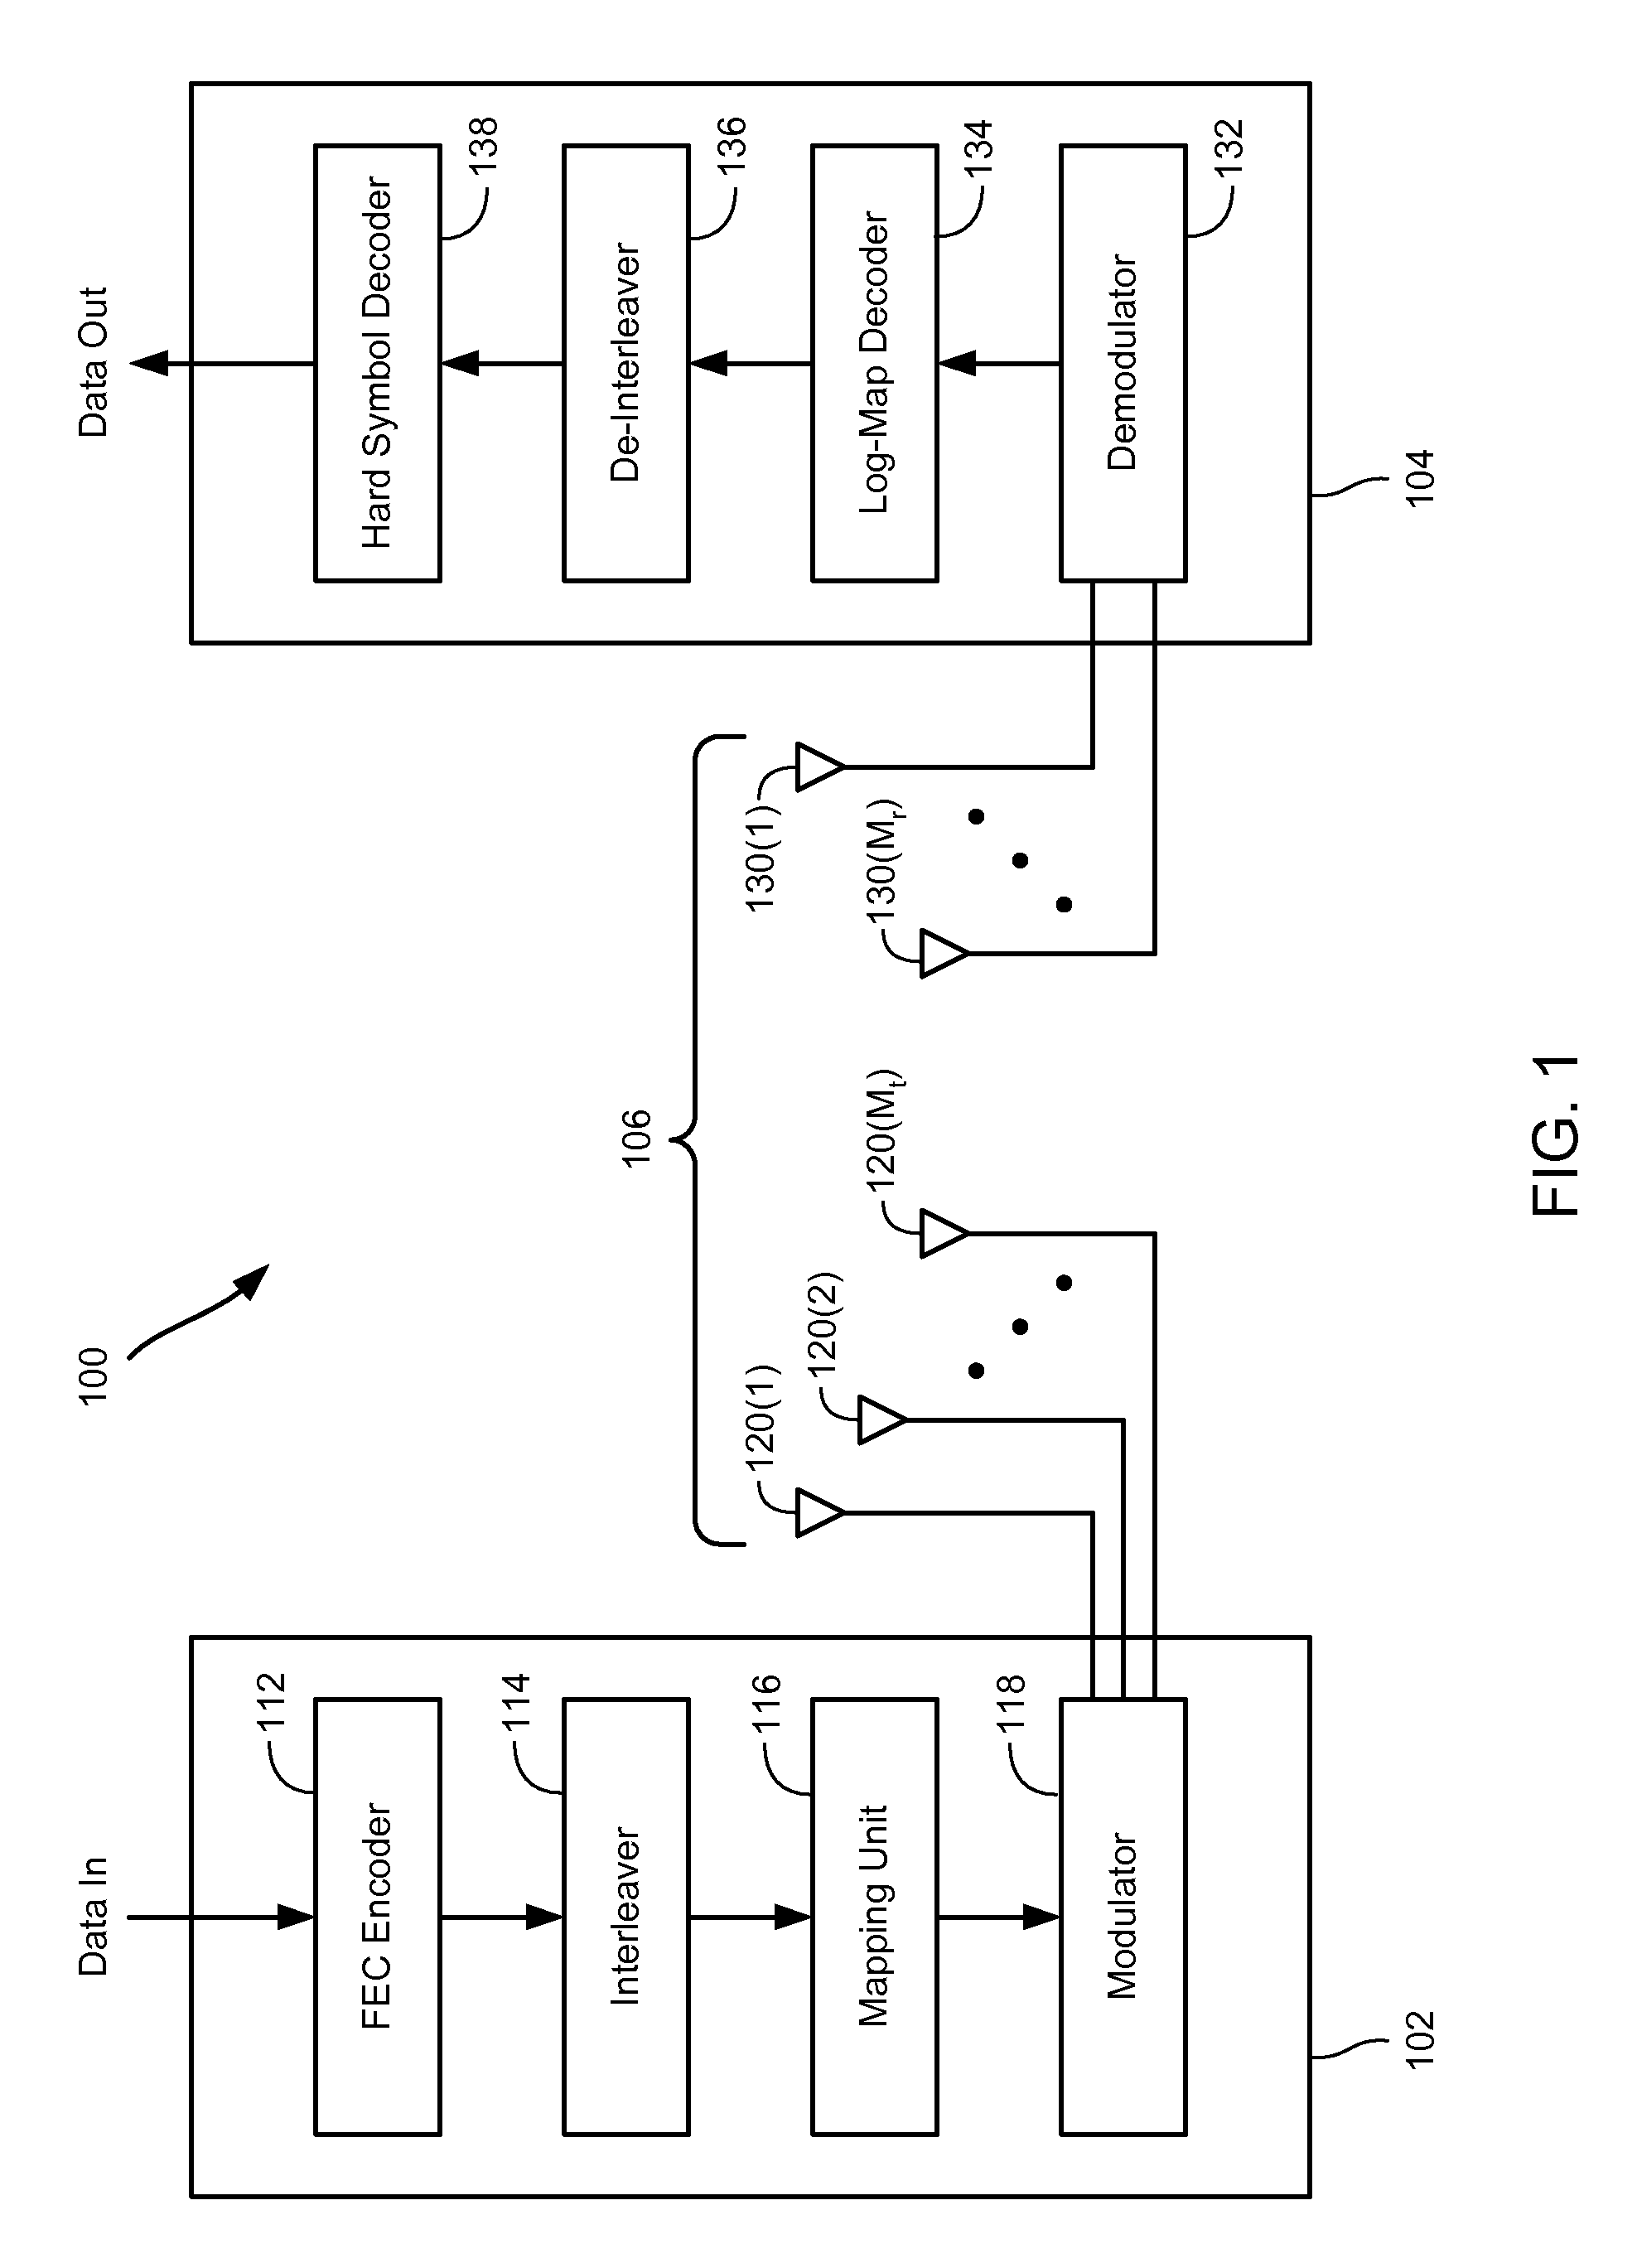 Soft symbol decoding for MIMO communication systems with reduced search complexity